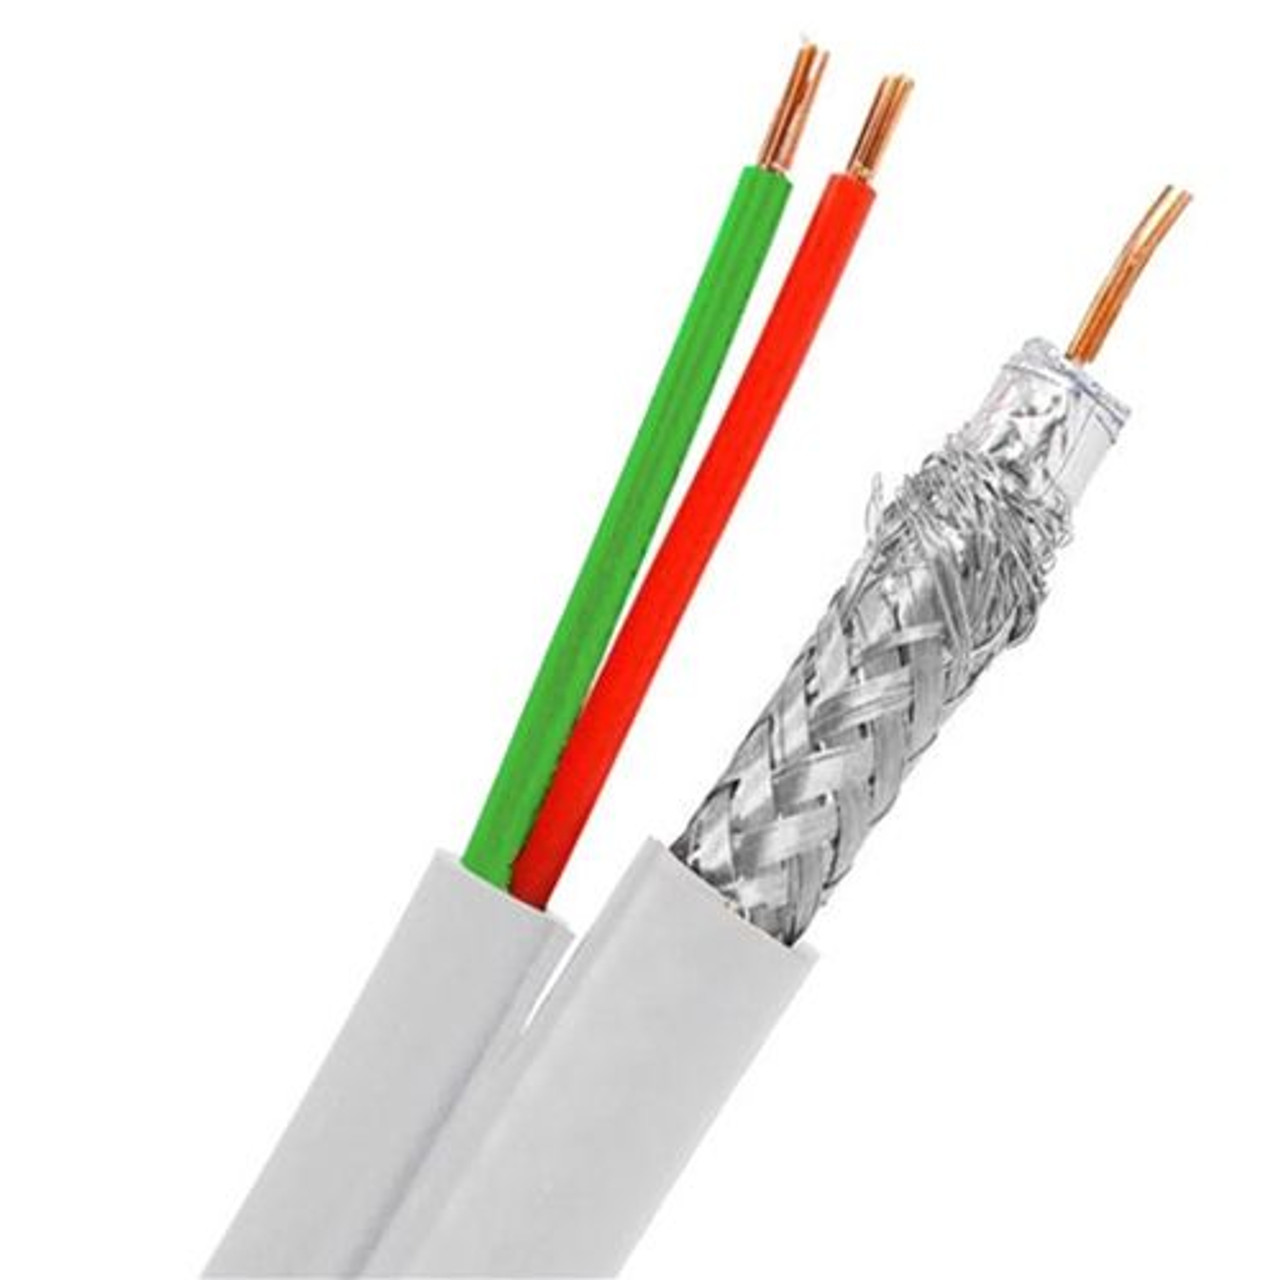 Eagle 39W2P 500' FT RG6 Coaxial Cable 18 AWG Solid Bare Copper Center Siamese With 22 AWG 2 Conductor White Data Telephone Security, Part # 29W2P